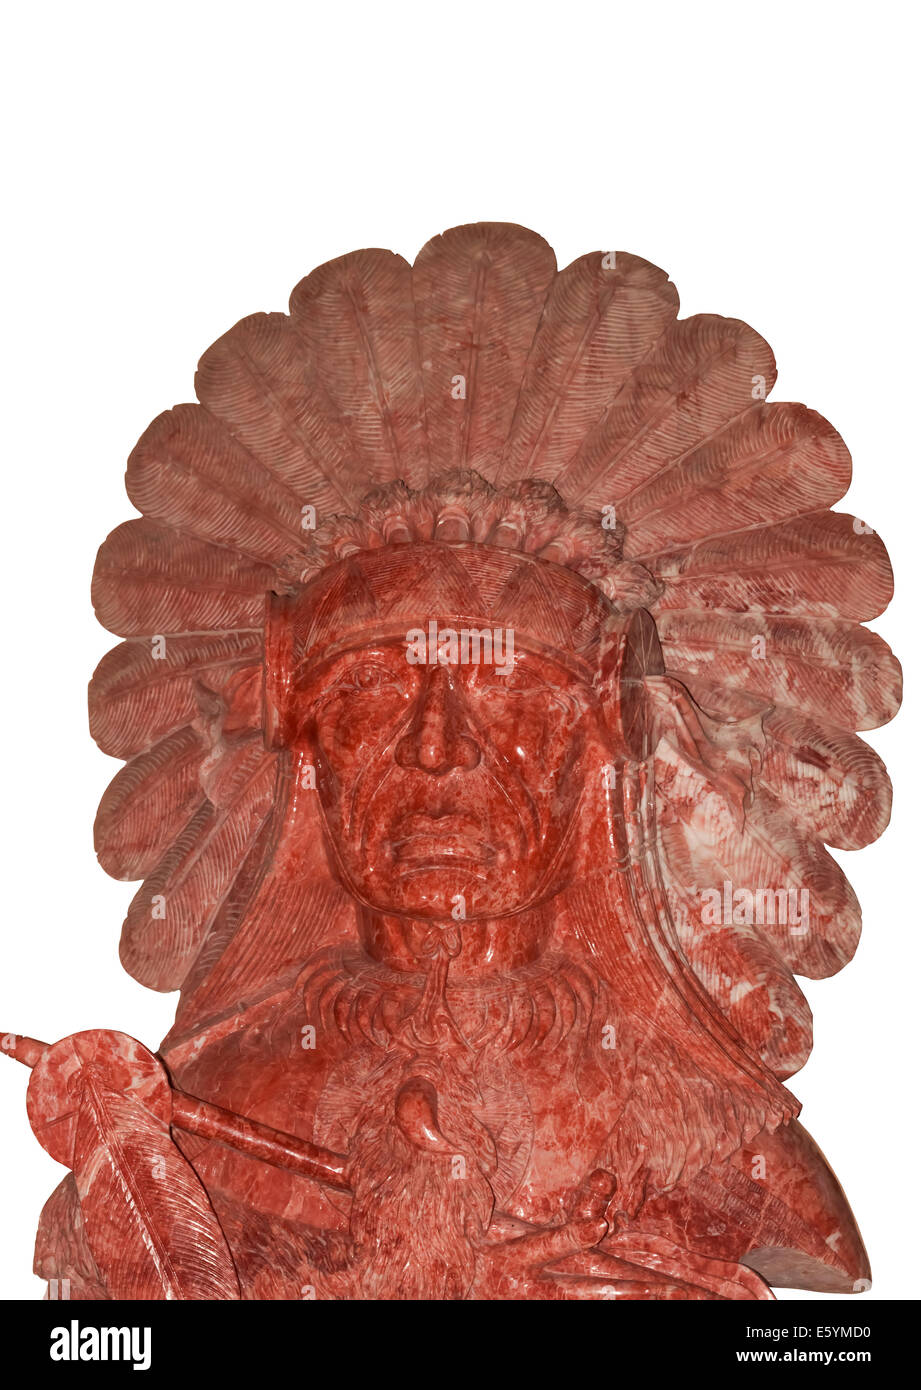 The Iroquoian  statue on white background. Stock Photo